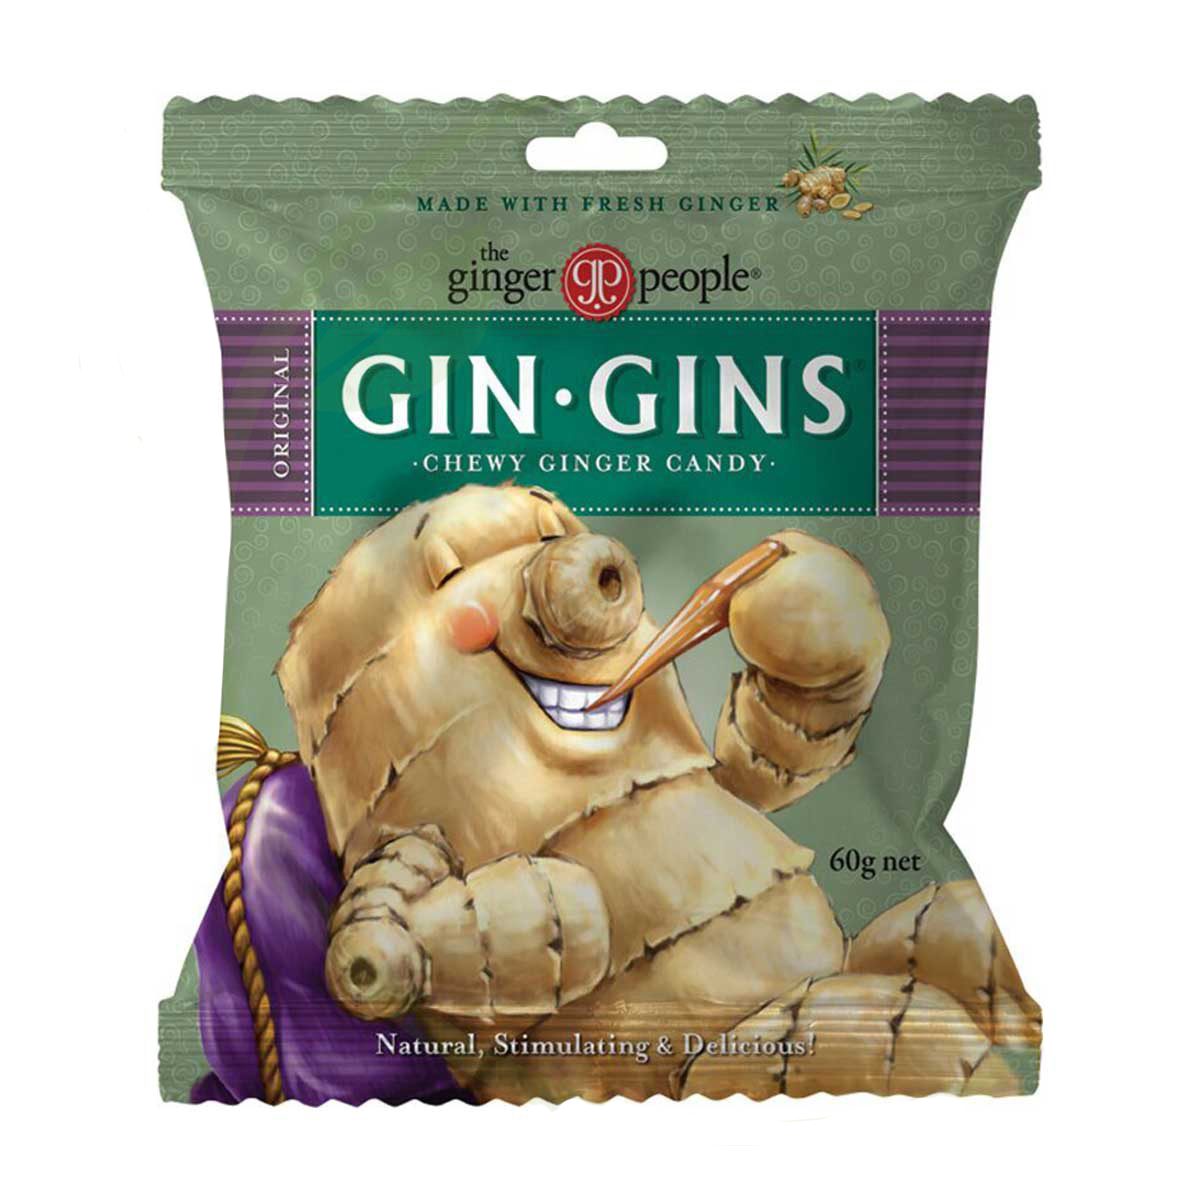 Buy The Ginger People Gin Gins® Original Chewy Ginger Candy Online 60g